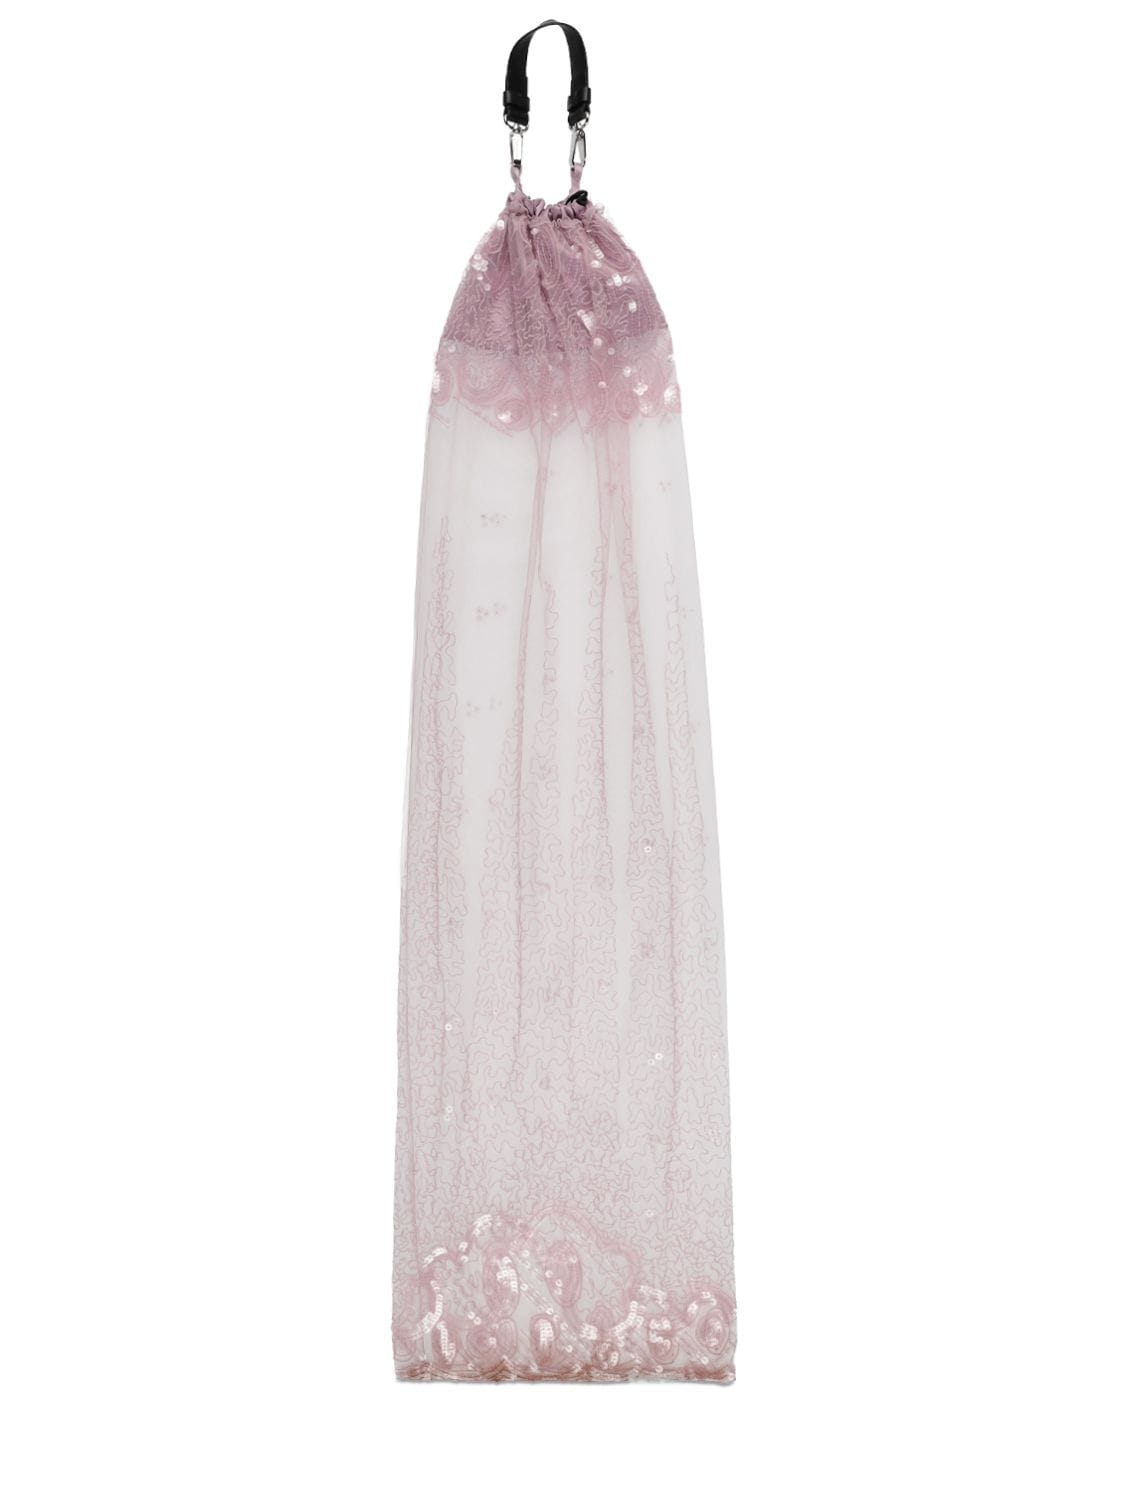 16arlington Agatha Sequined Tulle Bag In Pink